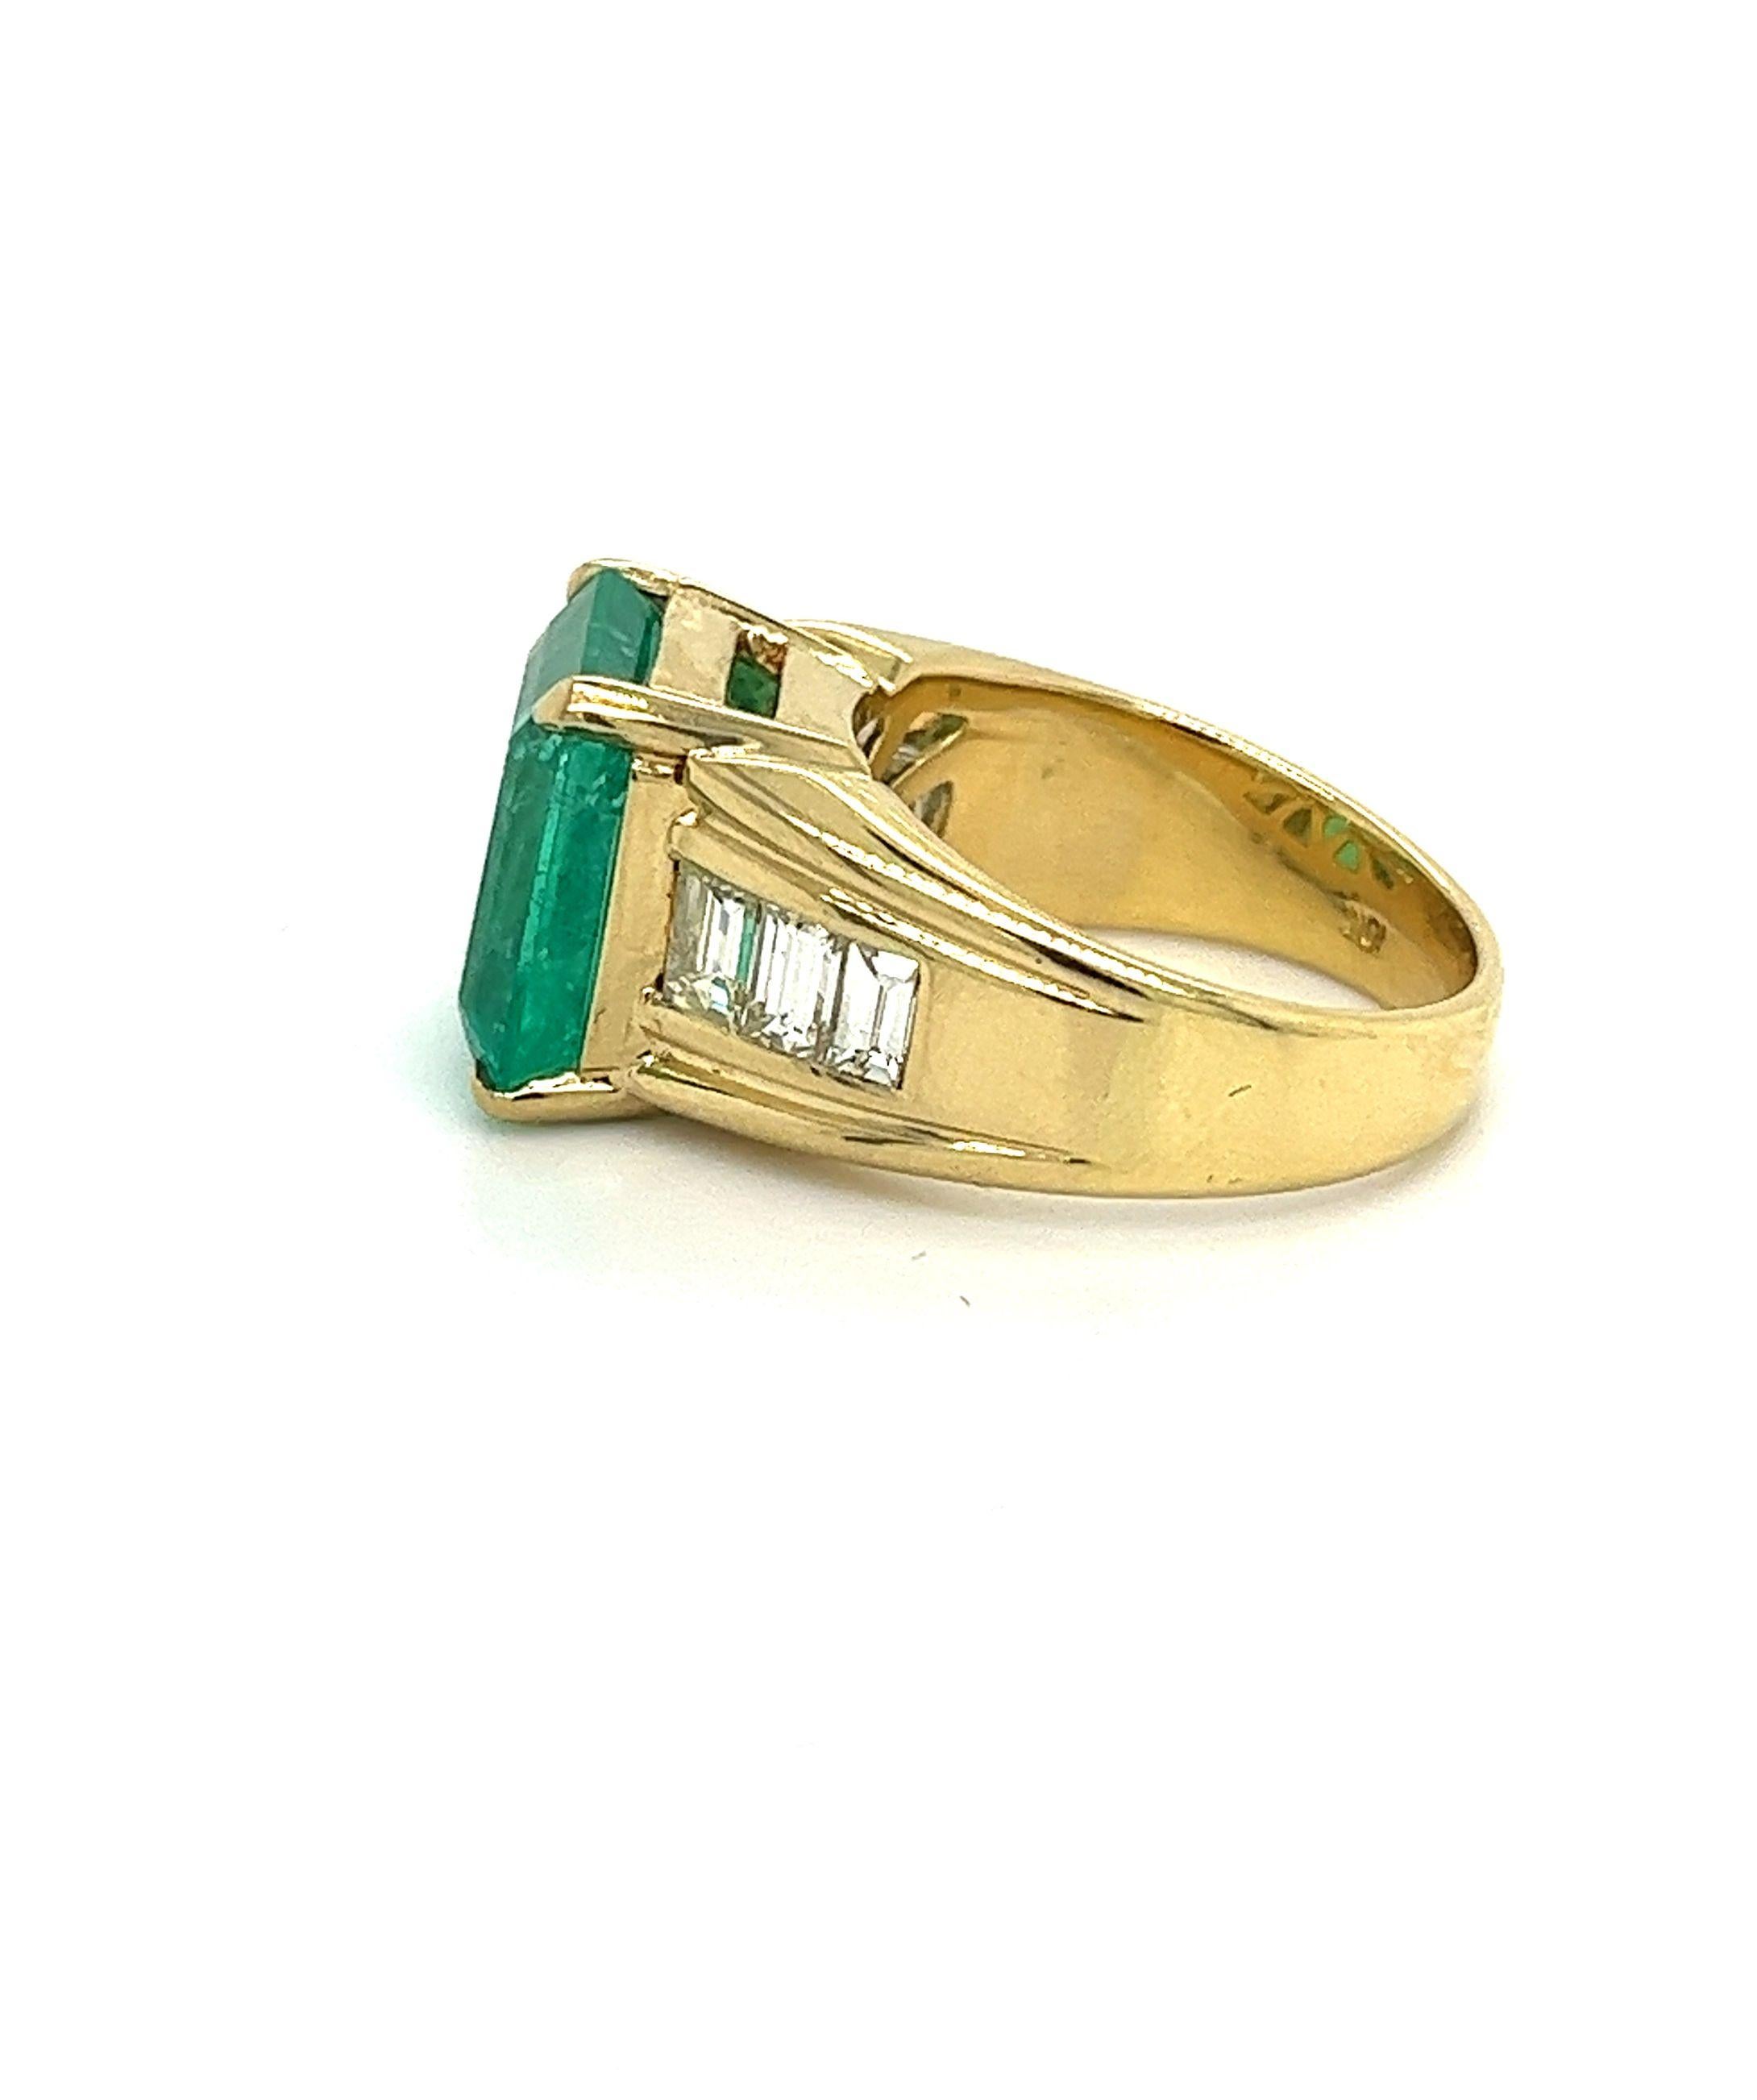 GIA Certified 8.64 Carat Colombian Emerald & Baguette Diamond Ring in 18K Gold  For Sale 2